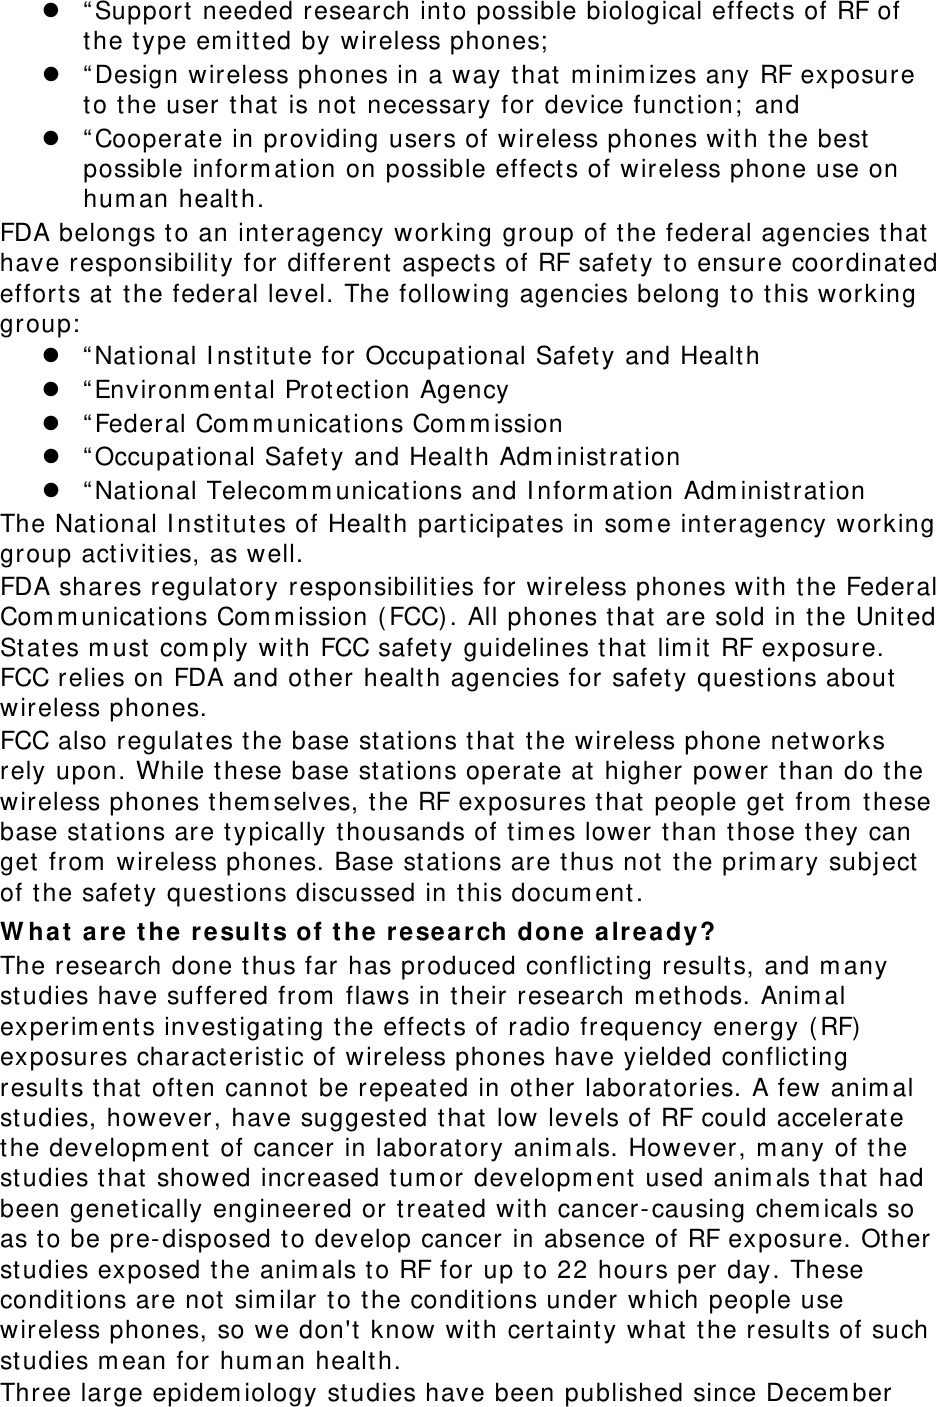  “ Support  needed research int o possible biological effects of RF of the t ype em itted by w ireless phones;   “ Design wireless phones in a way t hat  m inim izes any RF exposure to t he user t hat  is not necessary for device function;  and  “ Cooperat e in providing users of wireless phones wit h t he best possible inform at ion on possible effect s of wireless phone use on hum an healt h. FDA belongs t o an int eragency working group of t he federal agencies that  have responsibilit y for  different aspect s of RF safet y t o ensure coordinated effort s at the federal level. The following agencies belong t o this working group:   “ Nat ional I nst itut e for Occupat ional Safet y and Healt h  “ Environm ent al Prot ect ion Agency  “ Federal Com m unicat ions Com m ission  “ Occupational Safet y and Health Adm inistrat ion  “ Nat ional Telecom m unicat ions and I nform ation Adm inistrat ion The National I nst itut es of Healt h part icipat es in som e int eragency working group act ivit ies, as w ell. FDA shares regulat ory responsibilit ies for wireless phones wit h t he Federal Com m unications Com m ission ( FCC). All phones t hat are sold in t he Unit ed St at es m ust  com ply  with FCC safety guidelines t hat lim it  RF exposure. FCC relies on FDA and ot her healt h agencies for safet y quest ions about  wireless phones. FCC also regulates t he base st at ions t hat the wireless phone net works rely upon. While t hese base st at ions operat e at higher power t han do the wireless phones t hem selves, the RF exposures that  people get from  these base stat ions are t ypically thousands of tim es lower t han those t hey can get  from  wireless phones. Base stations are t hus not  t he prim ary subject of t he safet y quest ions discussed in t his docum ent . W ha t  a r e t he re sult s of t he r e se a r ch  done a lr ea dy? The research done t hus far has produced conflict ing result s, and m any studies have suffered from  flaws in t heir research m et hods. Anim al experim ent s invest igat ing t he effects of radio frequency energy (RF)  exposures charact erist ic of wireless phones have yielded conflict ing result s t hat  oft en cannot  be repeated in other laborat ories. A few  anim al studies, however, have suggest ed t hat  low levels of RF could accelerate the developm ent  of cancer in laborat ory anim als. However, m any of t he studies t hat showed increased t um or developm ent  used anim als t hat had been genetically engineered or t reated with cancer-causing chem icals so as t o be pre-disposed t o develop cancer in absence of RF exposure. Ot her studies exposed t he anim als t o RF for up t o 22 hours per day. These condit ions are not  sim ilar t o t he condit ions under which people use wireless phones, so we don&apos;t know wit h cert ainty what  t he result s of such studies m ean for hum an health. Three large epidem iology st udies have been published since Decem ber 